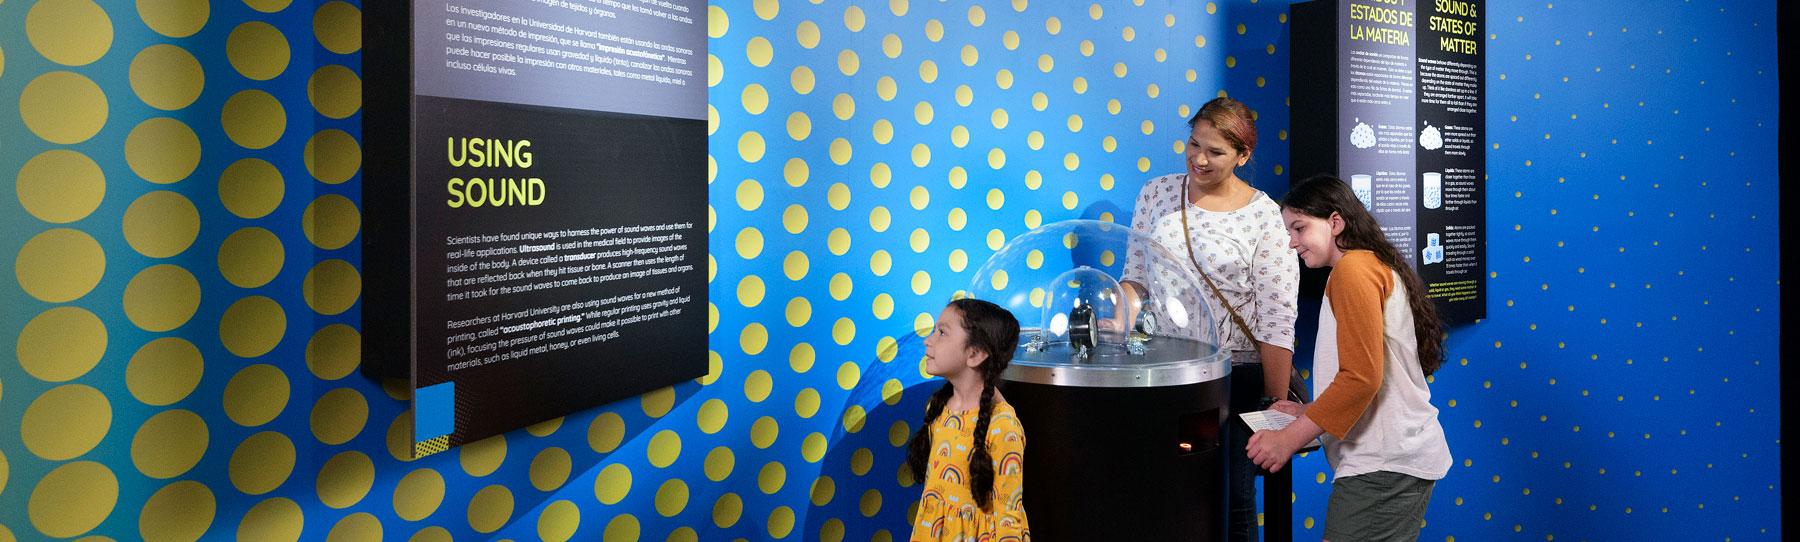 A mother and her two daughters look at hands-on demonstration and read a wall text panel in the Science of Sound exhibit.